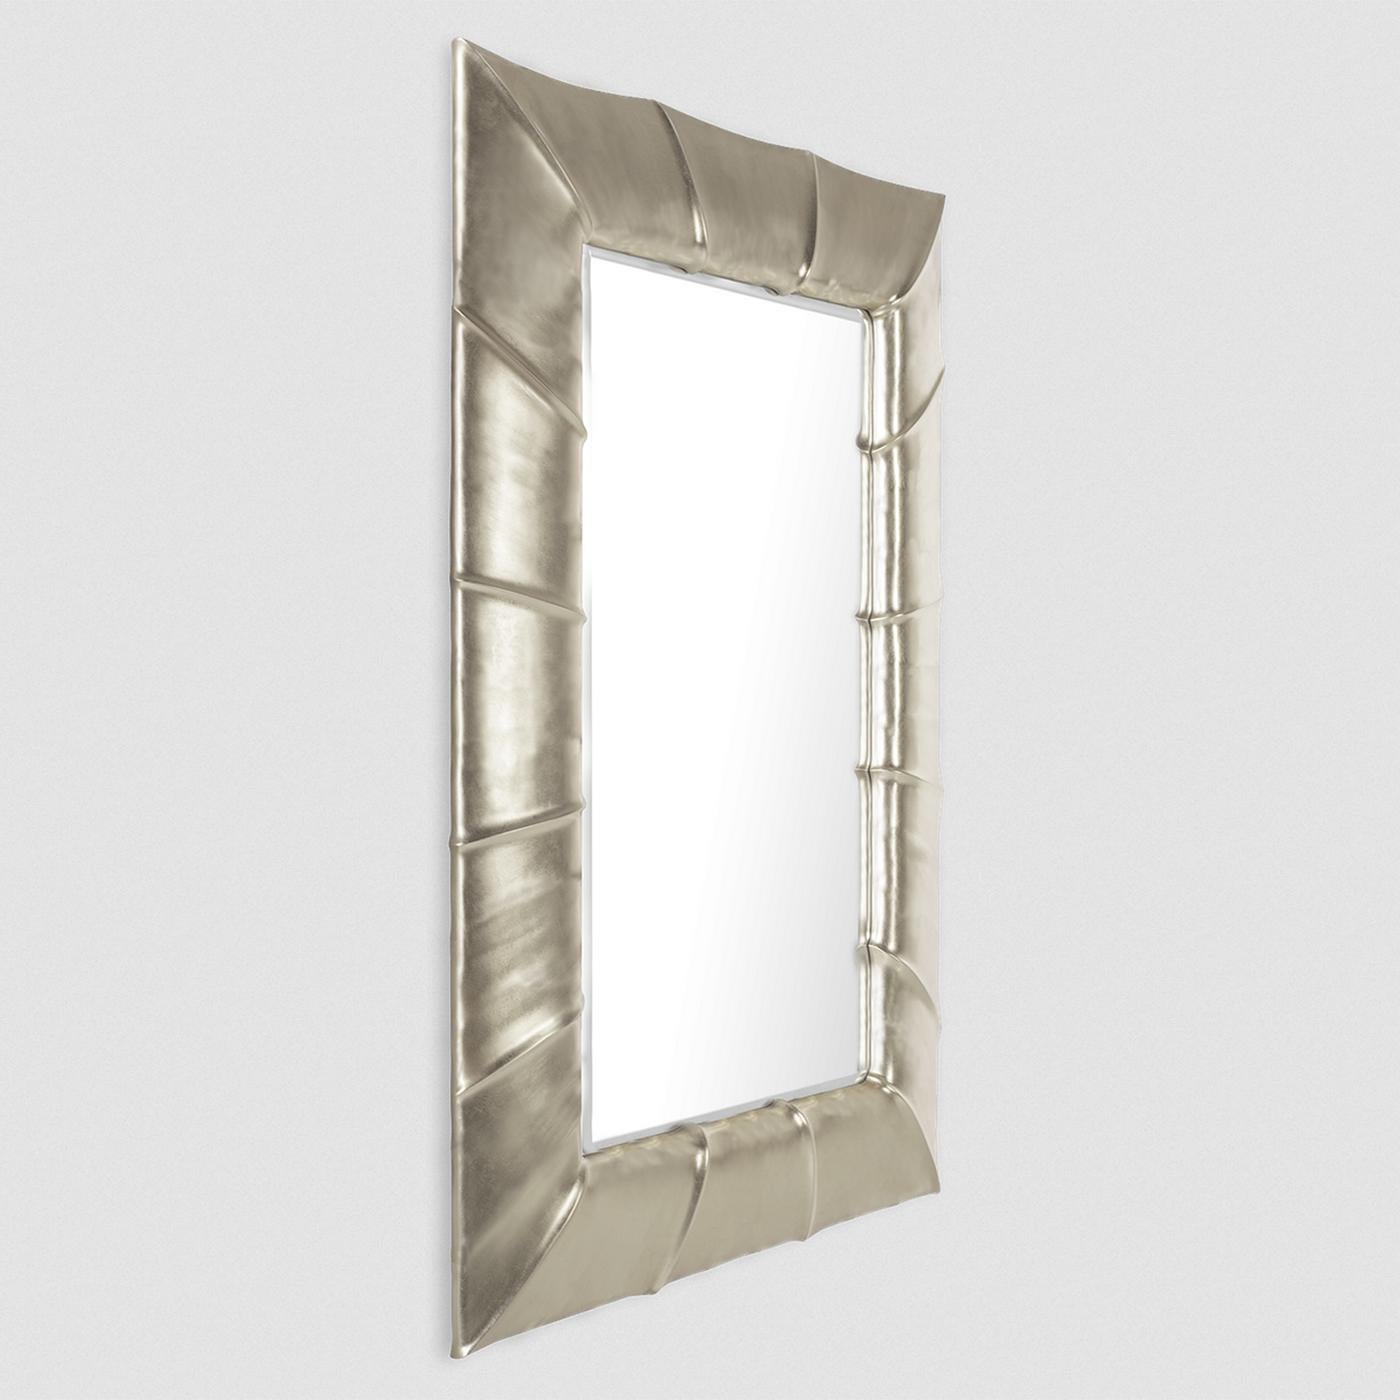 Mirror Scales Silver with hand-carved solid wood frame,
hand-painted with silver leaf. With beveled mirror glass.
Also available in gold leaf, on request.
Available in:
L77 x D4 x H108cm, price: 4900,00€
L94 x D5 x H130cm, price: 6200,00€
L110